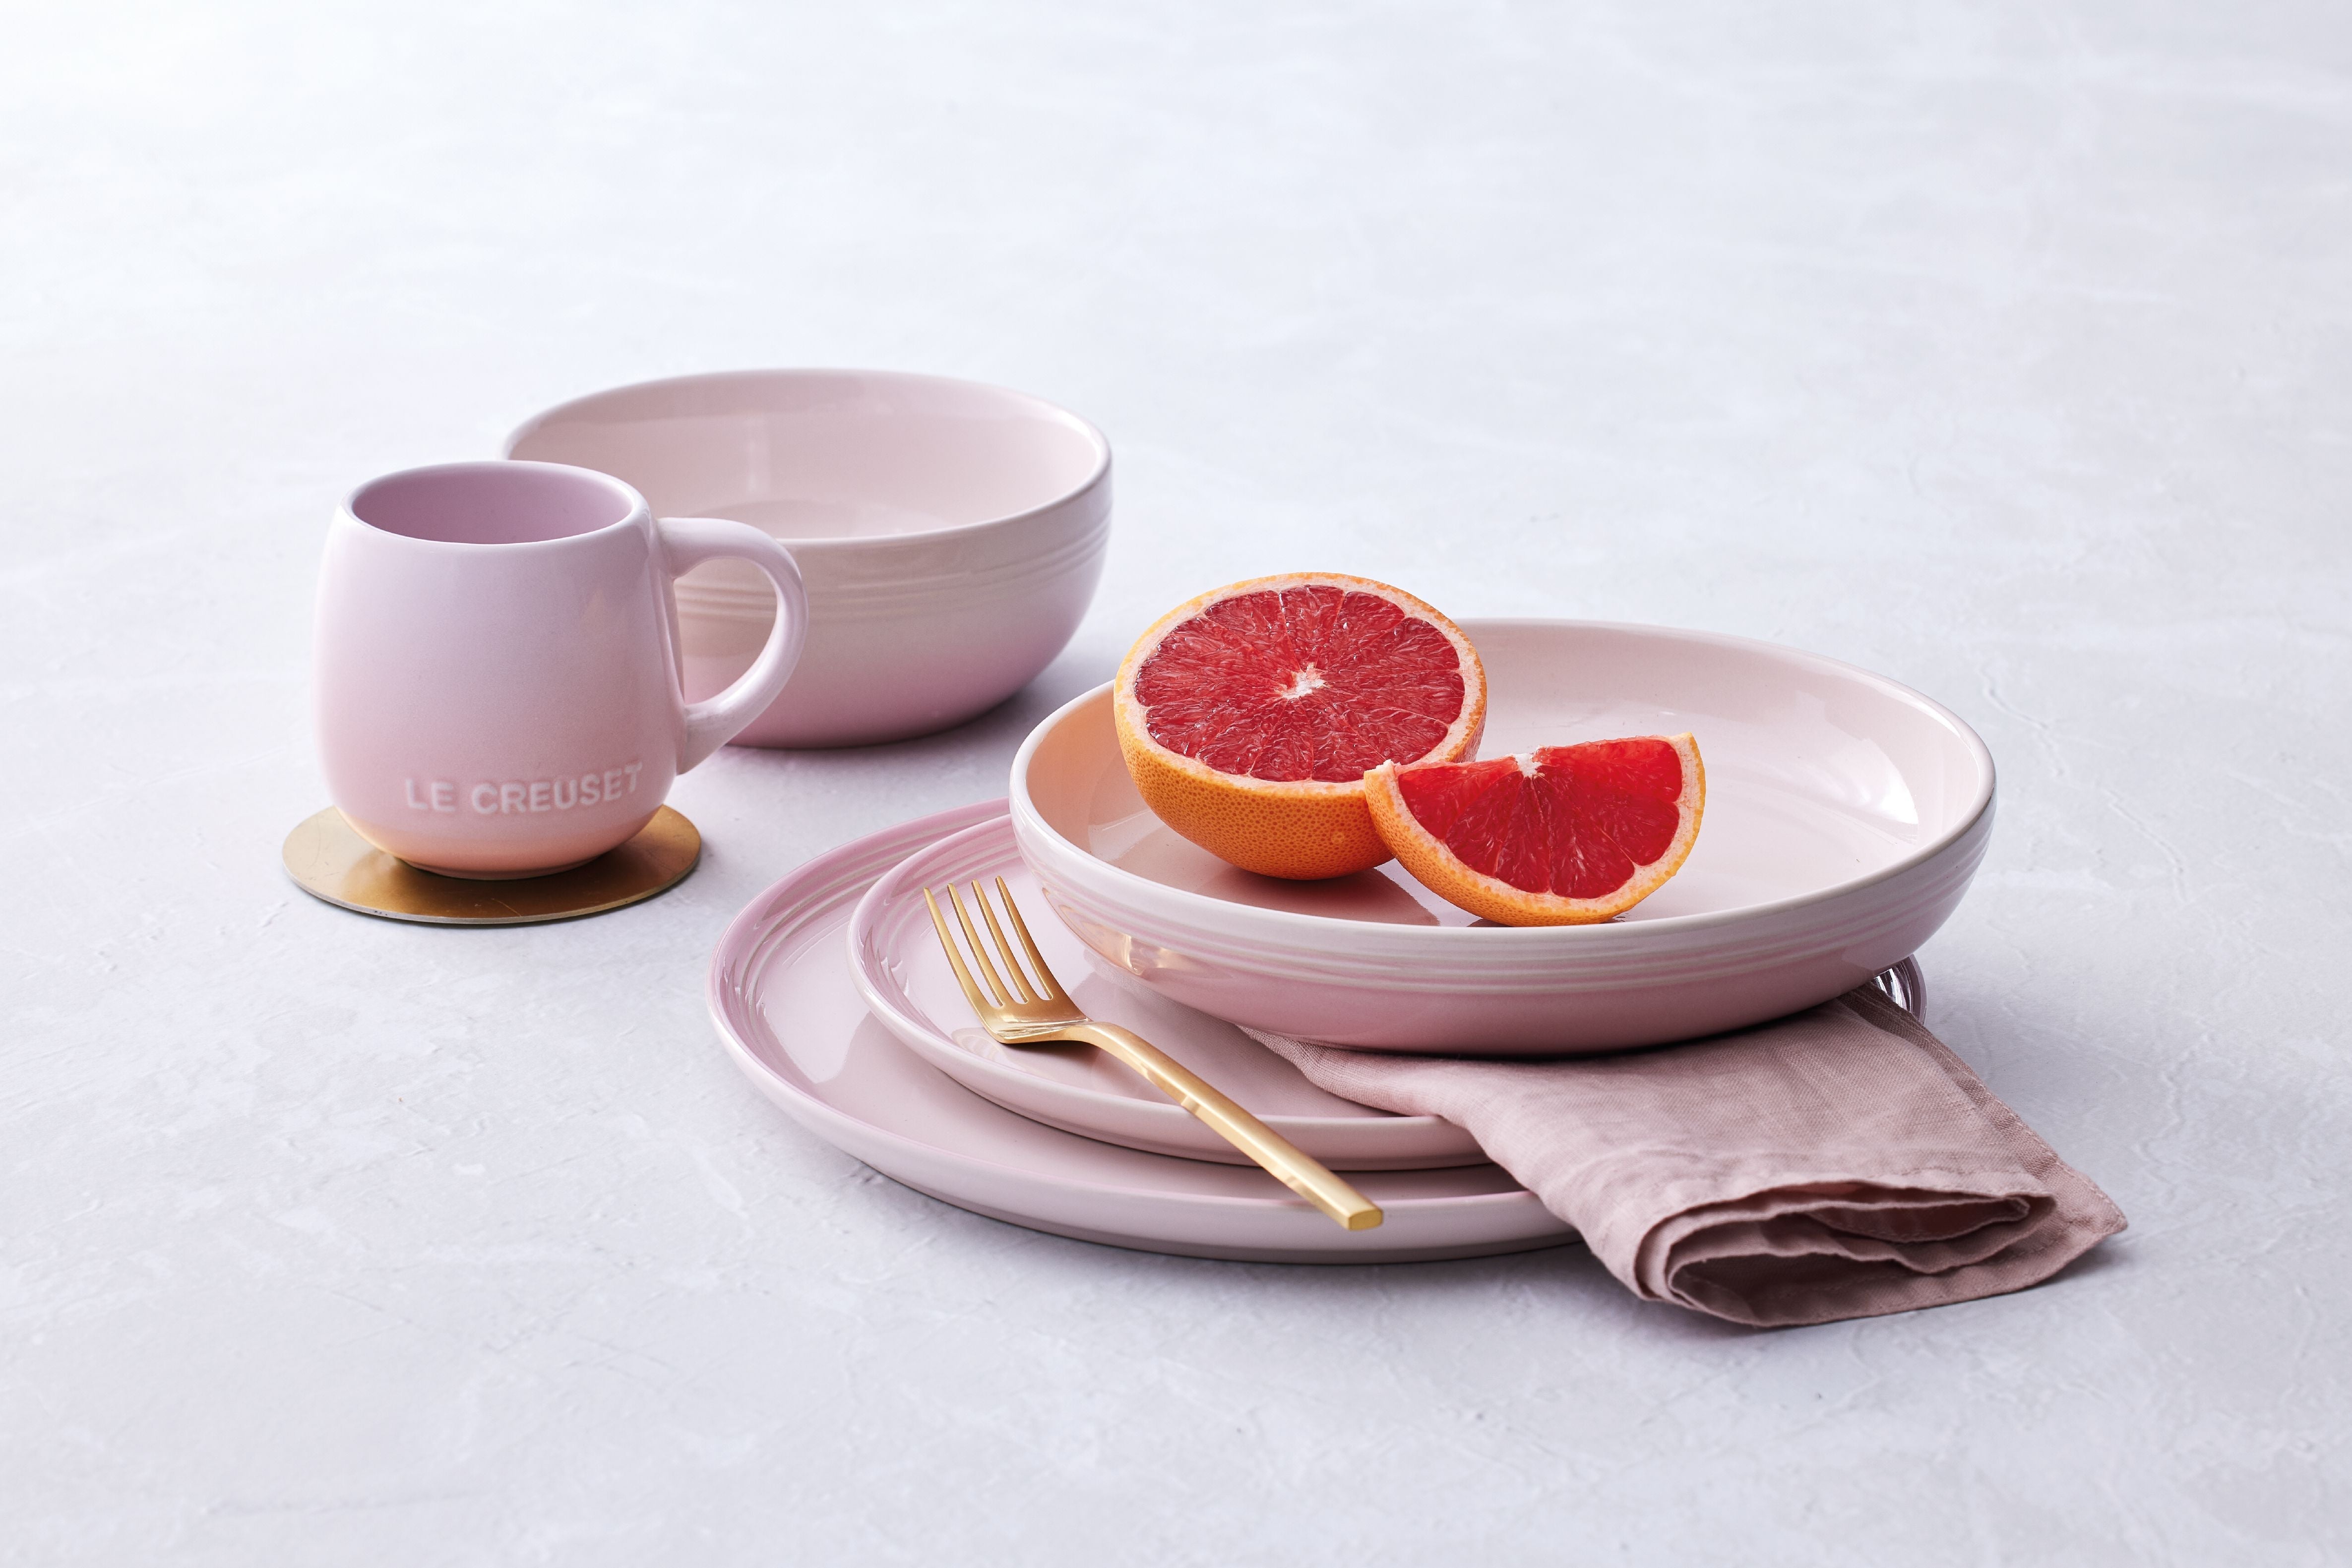 Le creuset coupe middagsplade, shell pink